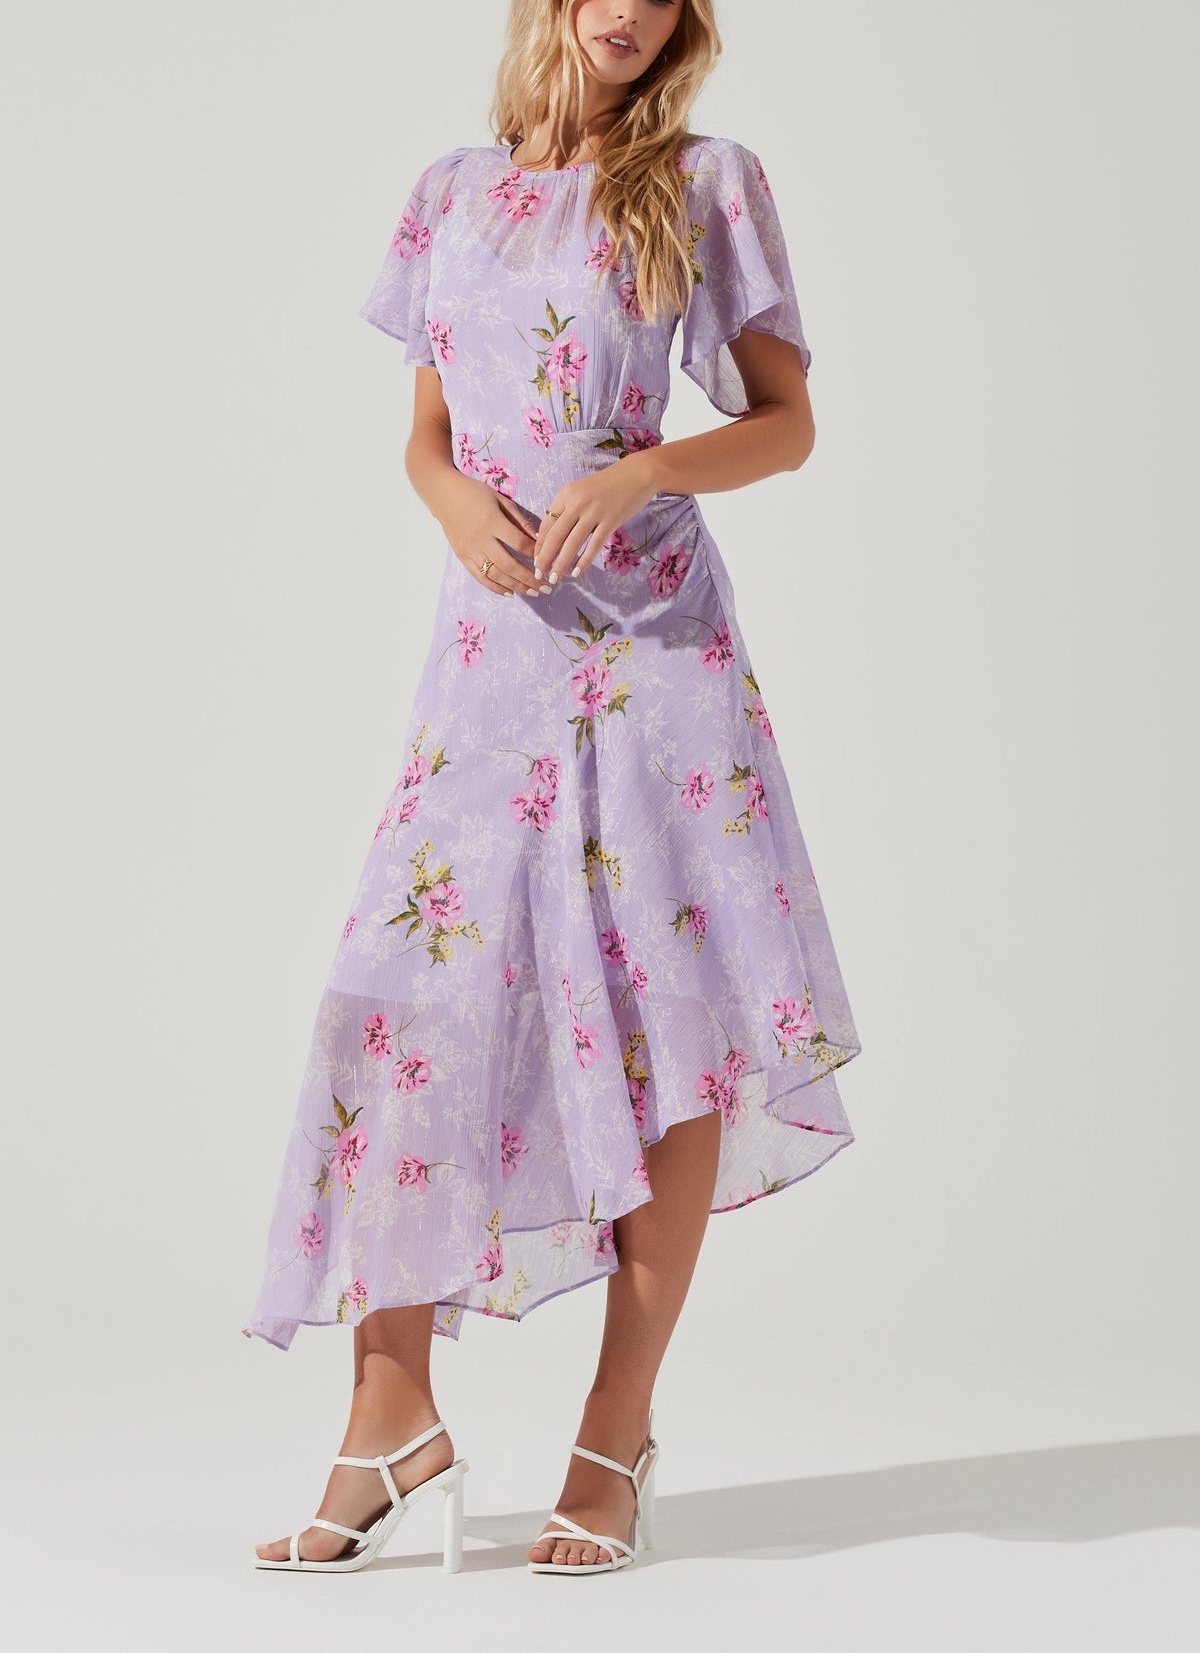 Feminine Floral Dresses for a Summer Wedding: ASTR the Label Review -  Styled by Science